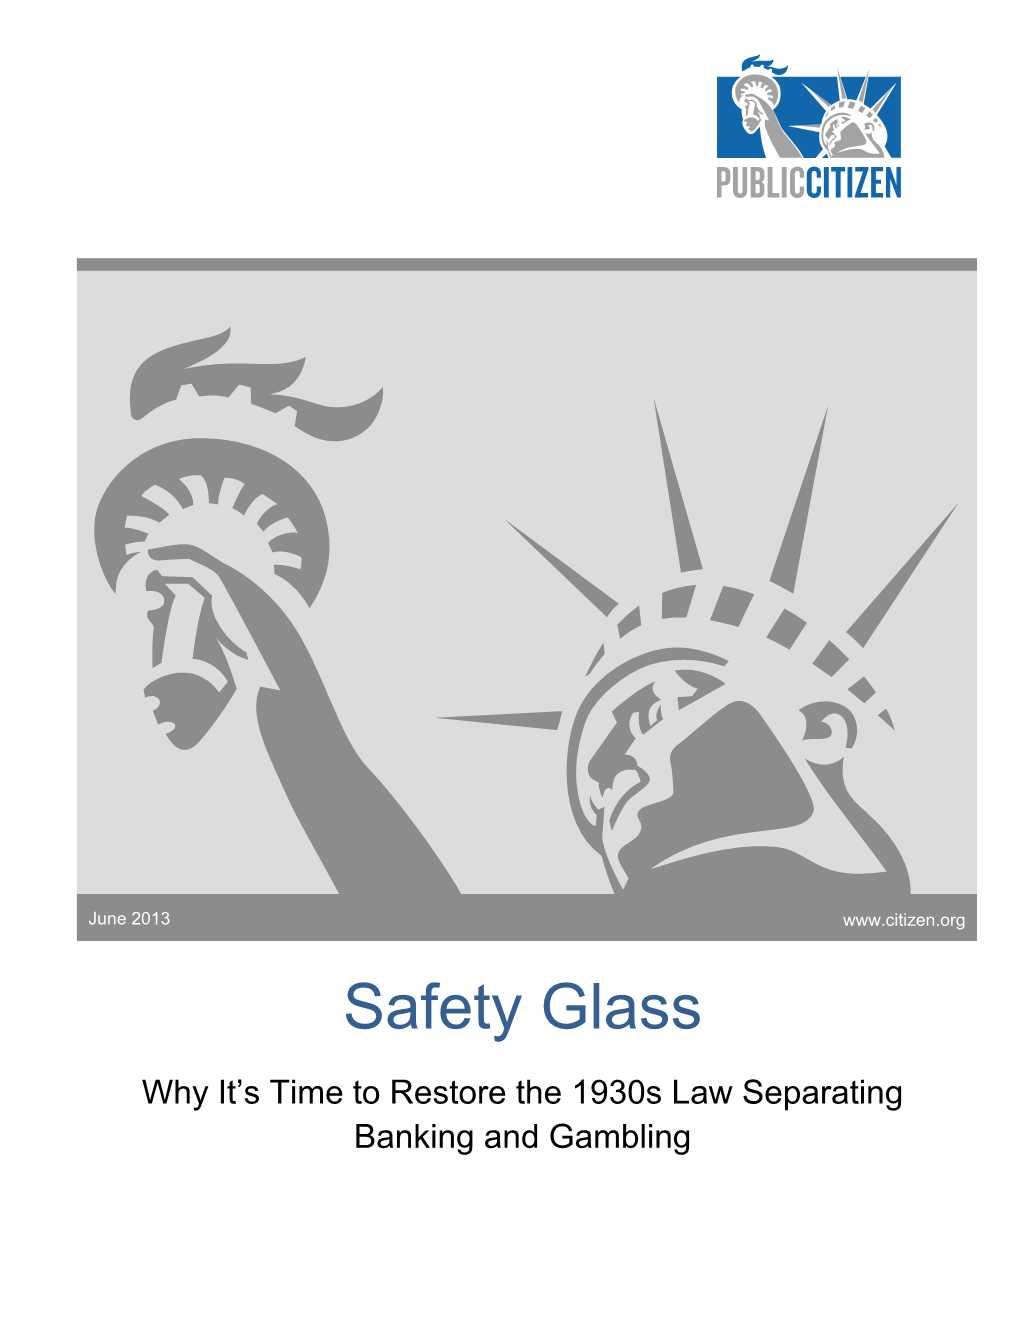 Safety Glass–Restoring Glass Steagall